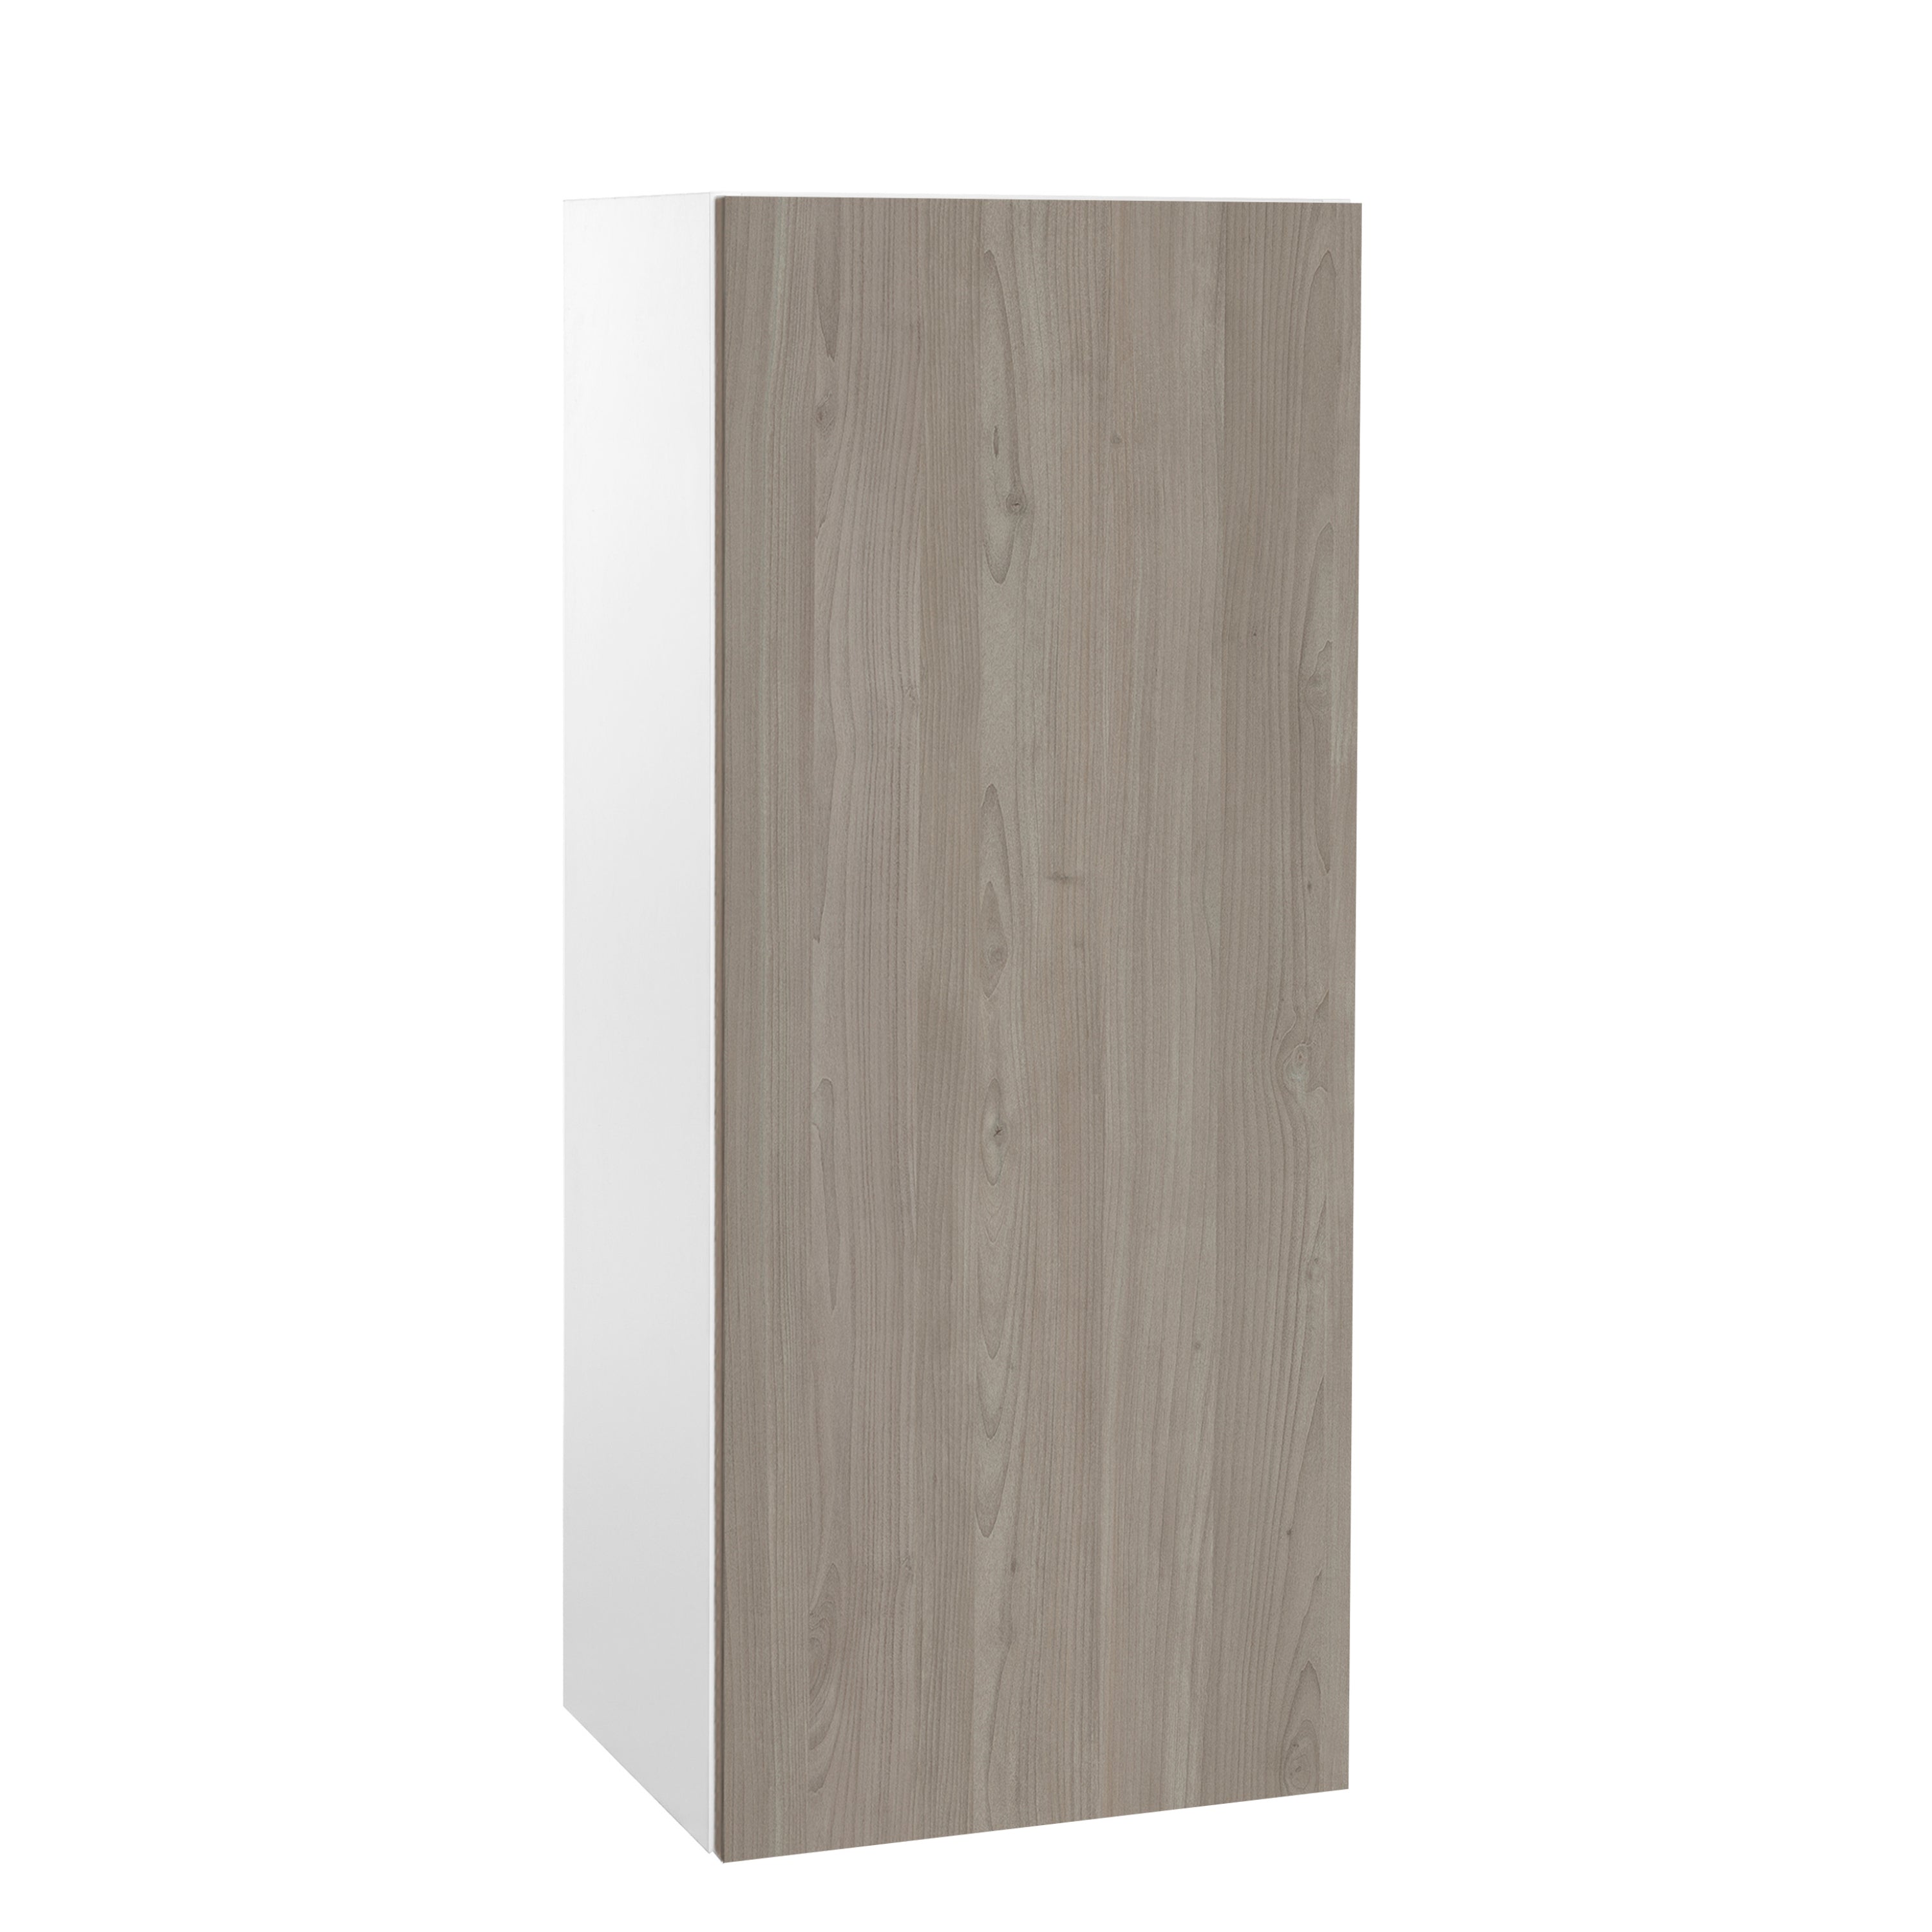 Quick Assemble Modern Style with Soft Close 18 in Wall Kitchen Cabinet (18 in W x 12 D x 42 in H) -  Pro-Edge HD